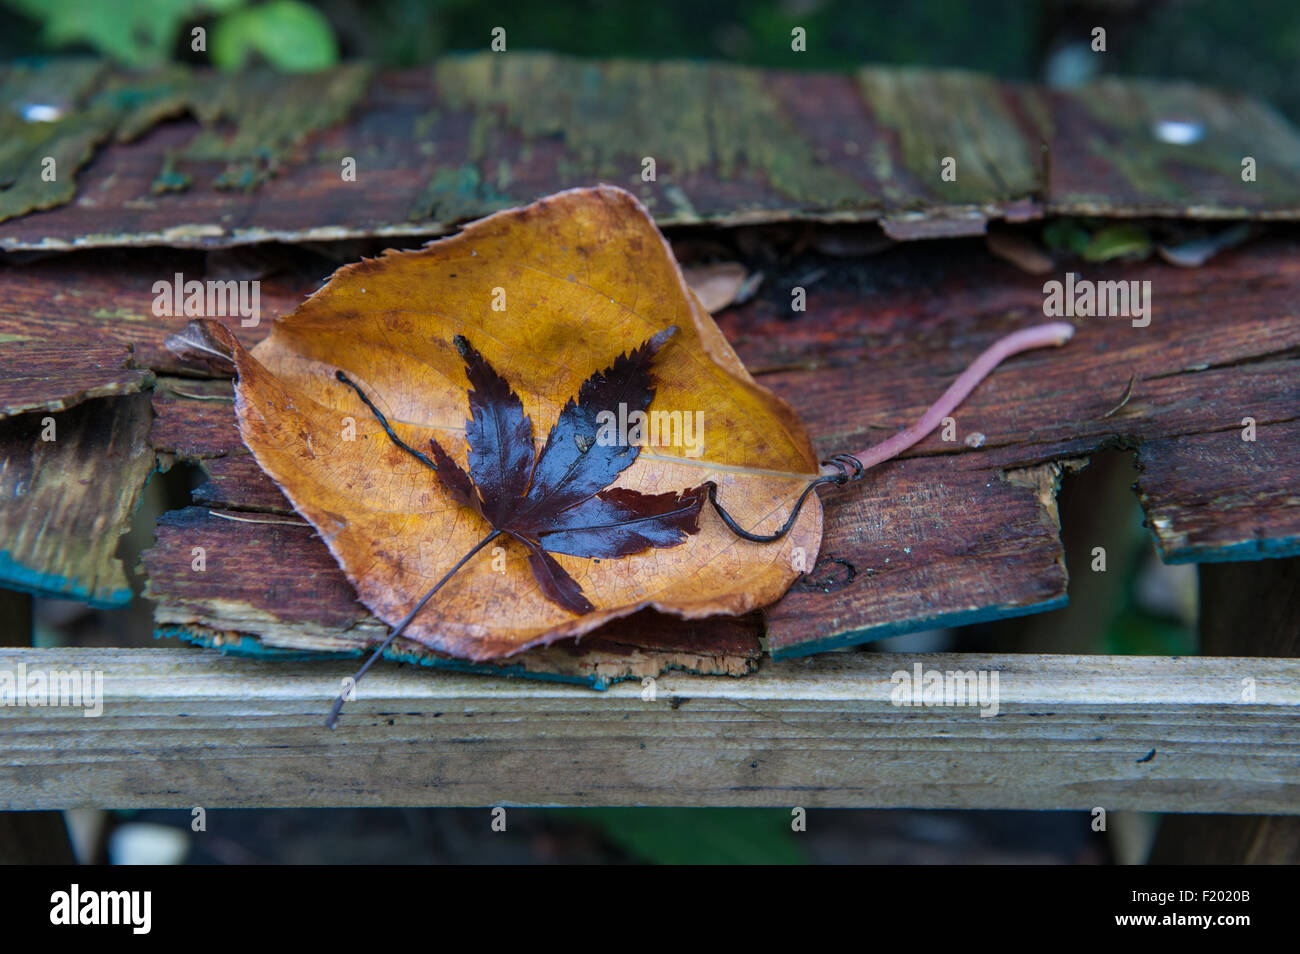 Autumn leaves on rotting wood, underlined by a single solid wooden cross-piece Stock Photo